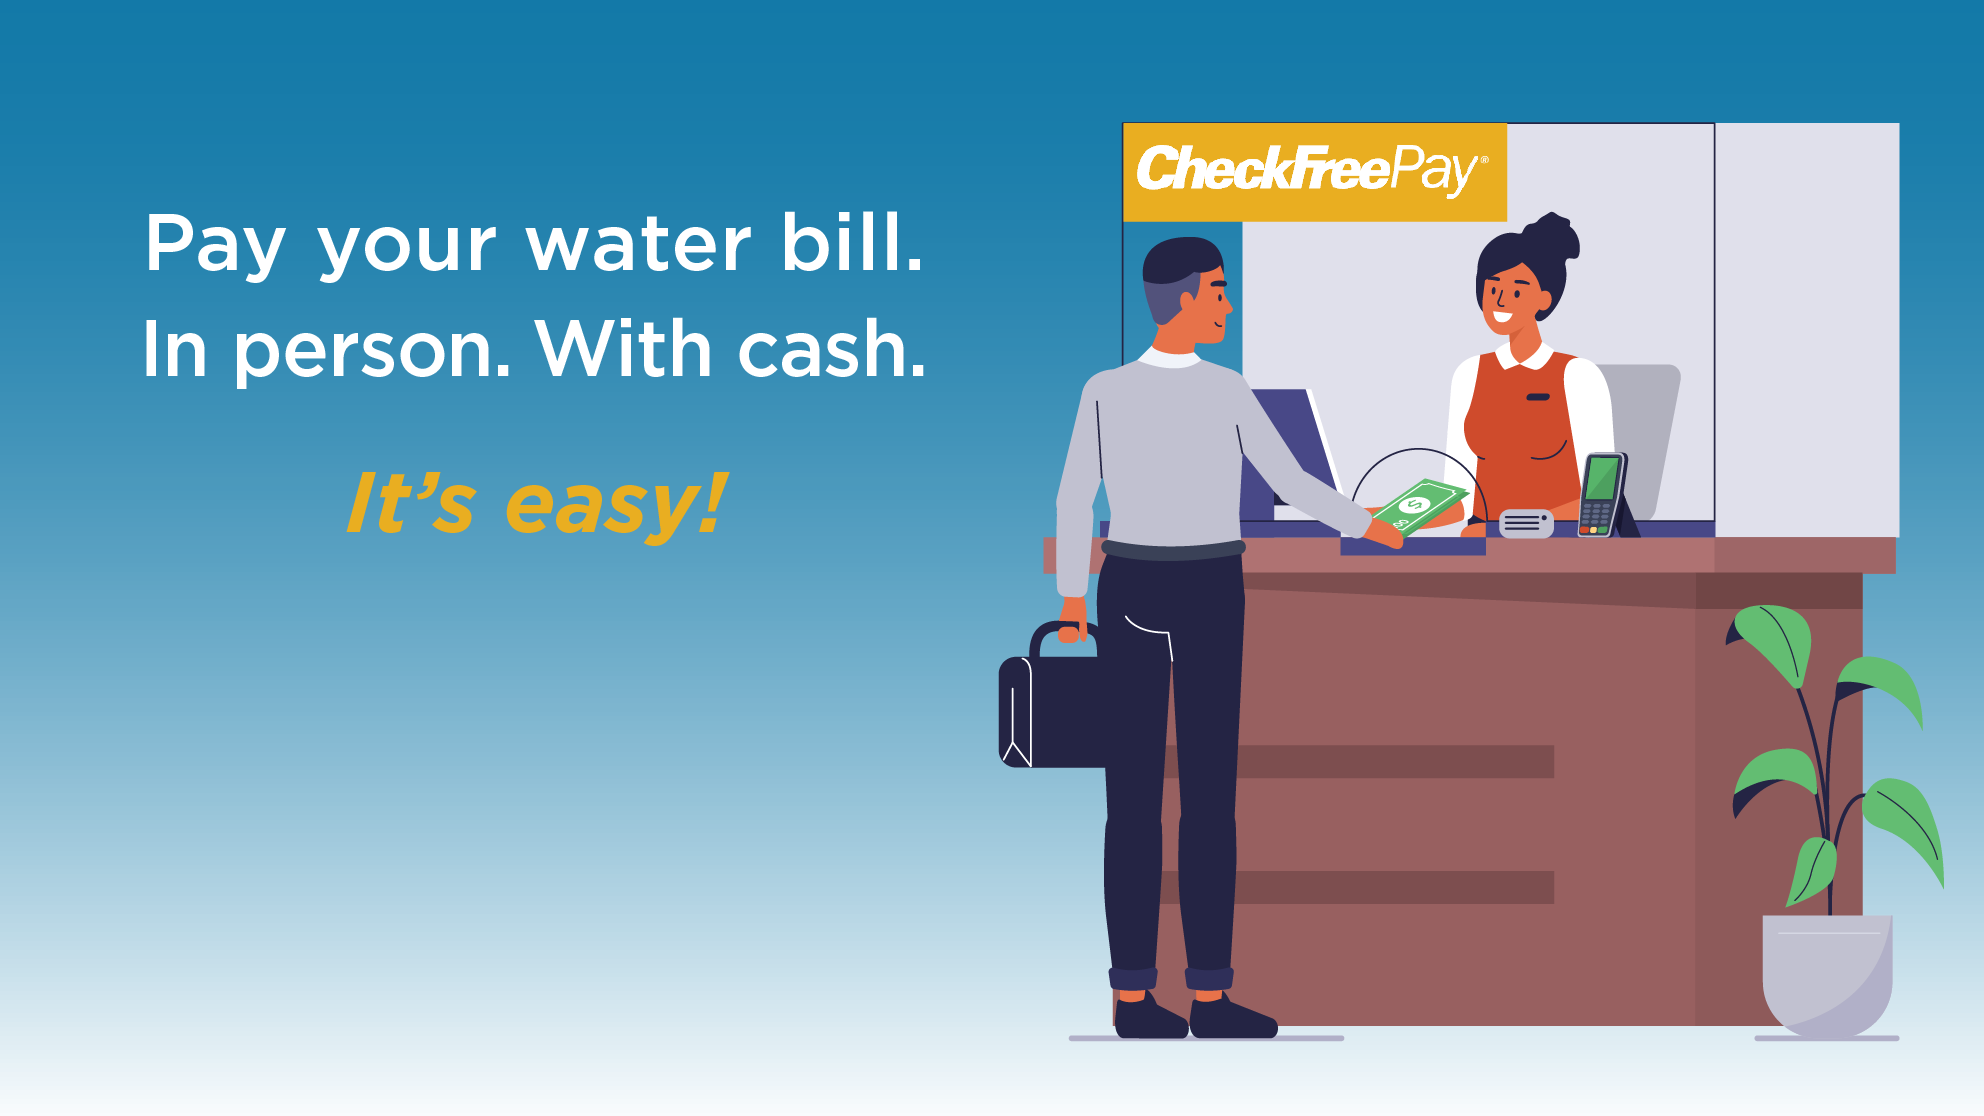 Pay your water bill. In person. With cash. It's easy!